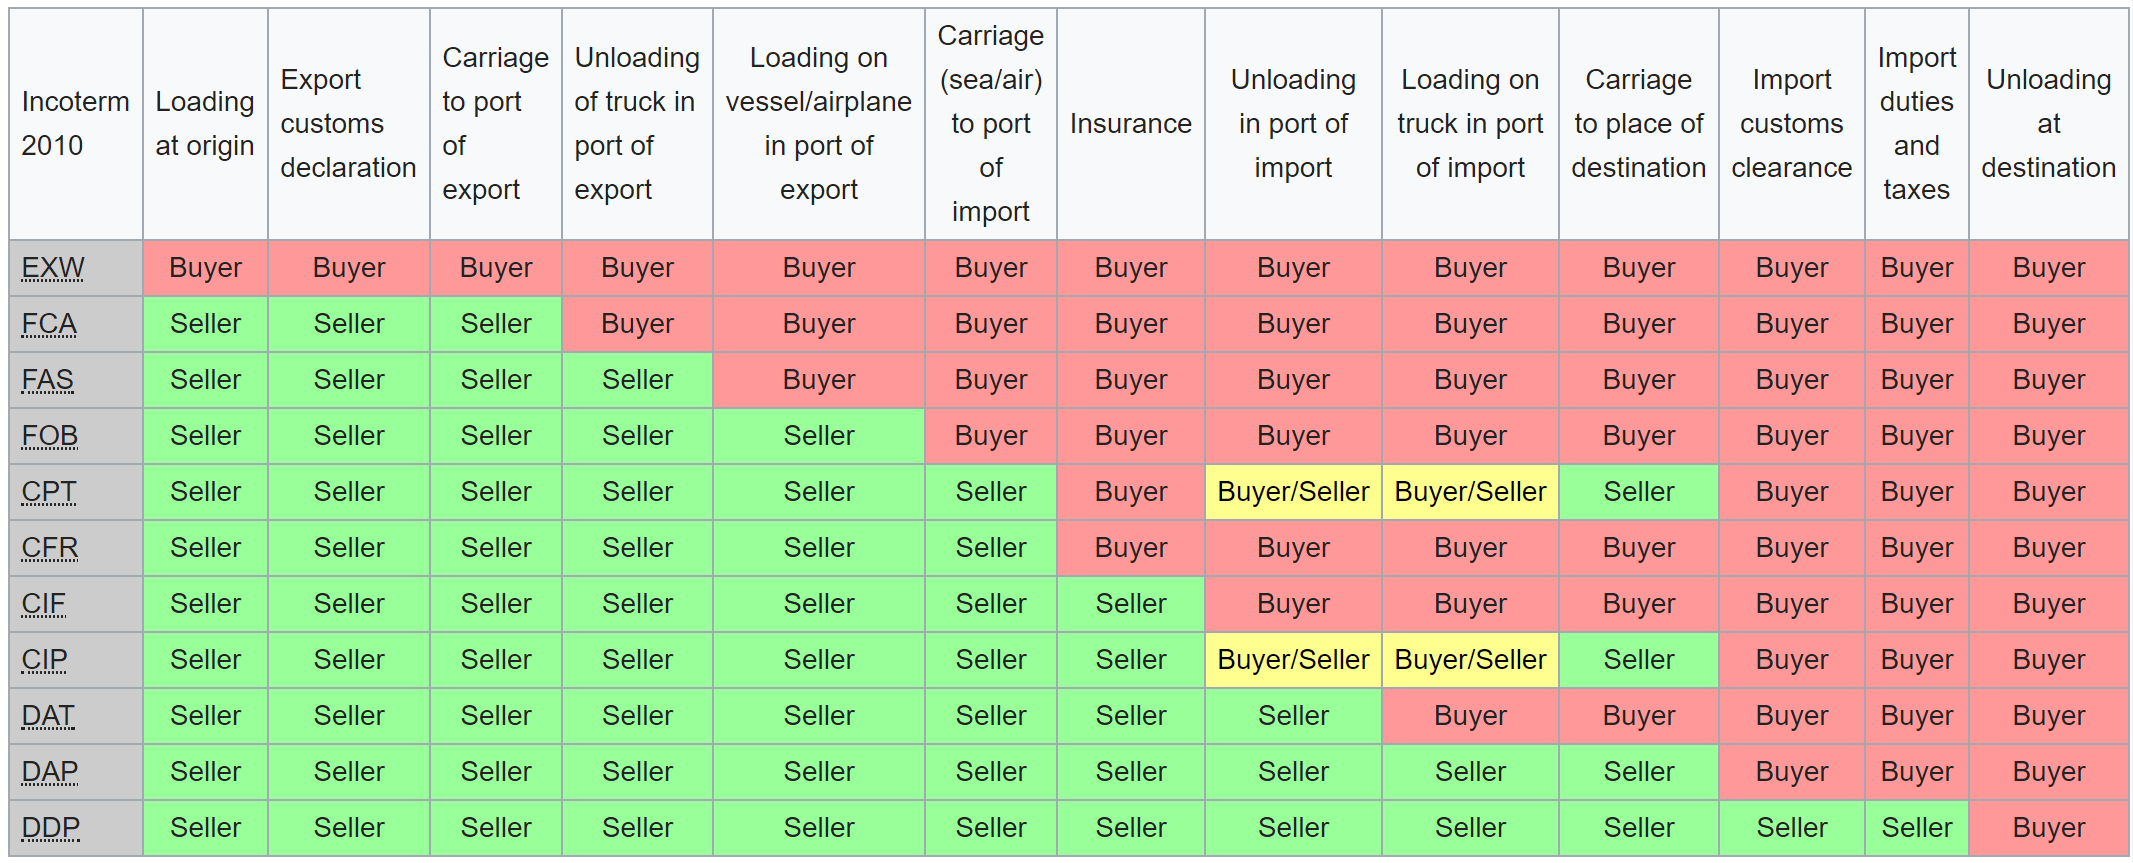 Incoterms1